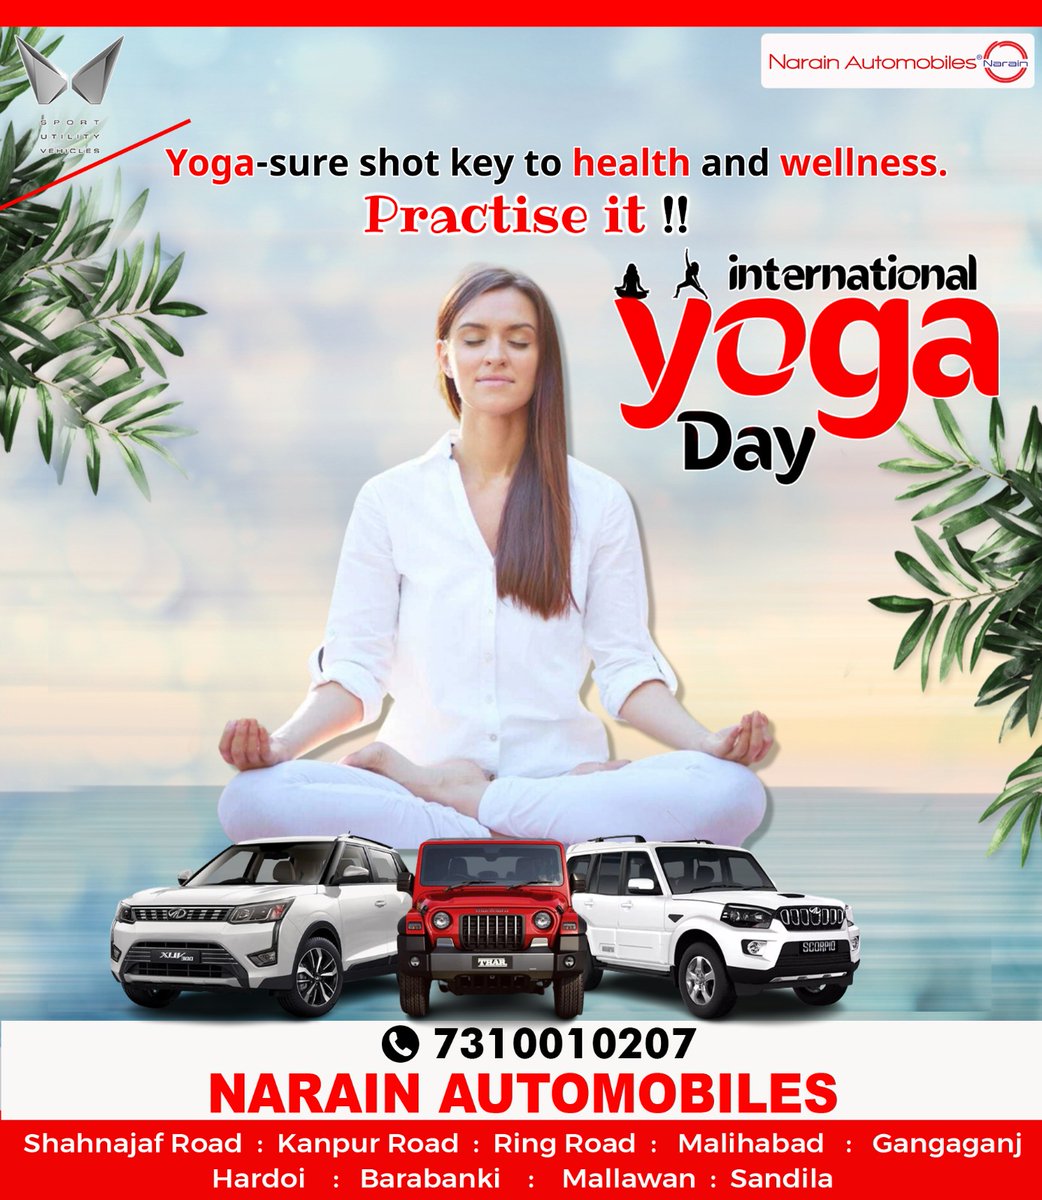 “Yoga is a light, which once lit will never dim. The better your practice, the brighter will be your flame.”

🧘 We wish you all a Happy International Yoga Day 🧘‍♂️

#internationalyogaday #yoga #yogaday #yogapractice #withyouhamesha #mahindrashowroom #mahindraworkshop  #lucknow